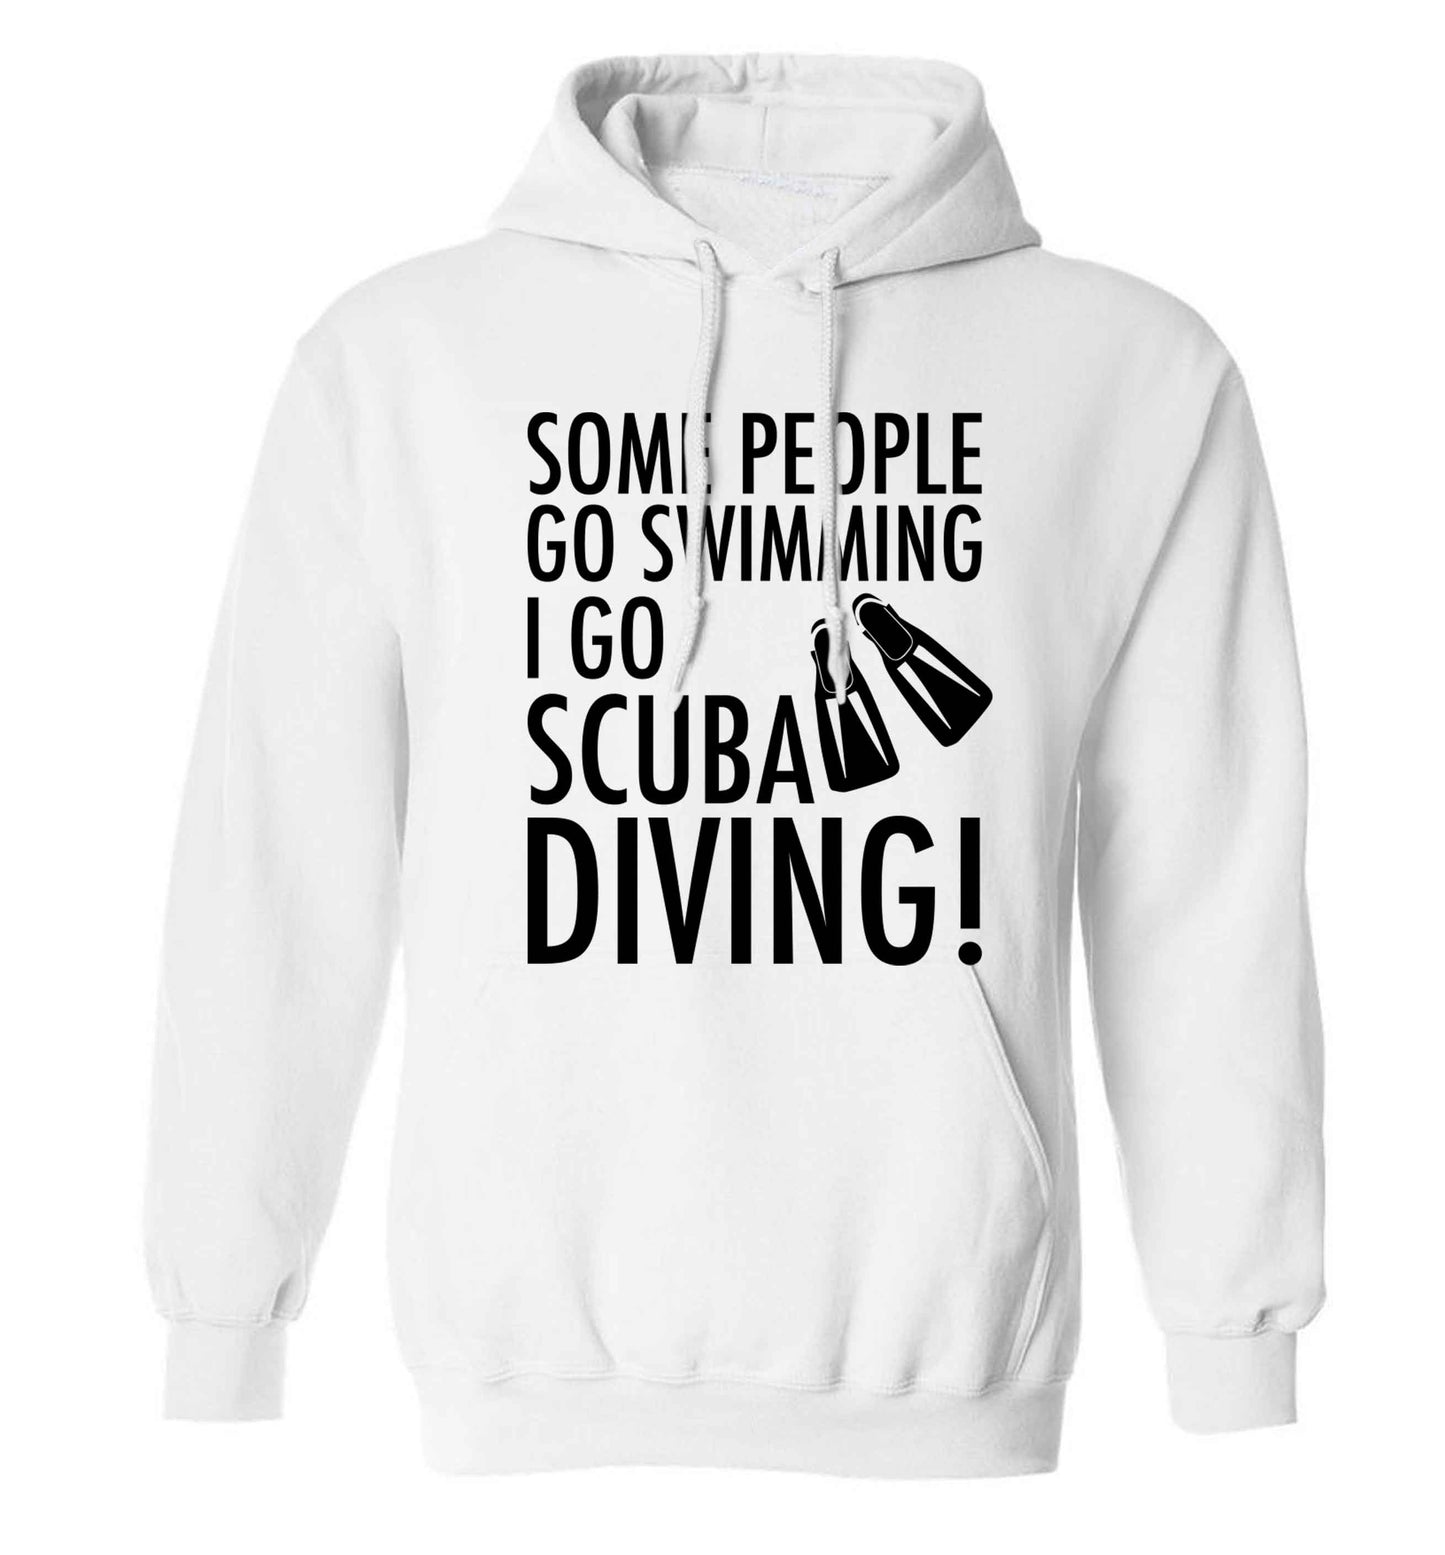 Some people go swimming I go scuba diving! adults unisex white hoodie 2XL